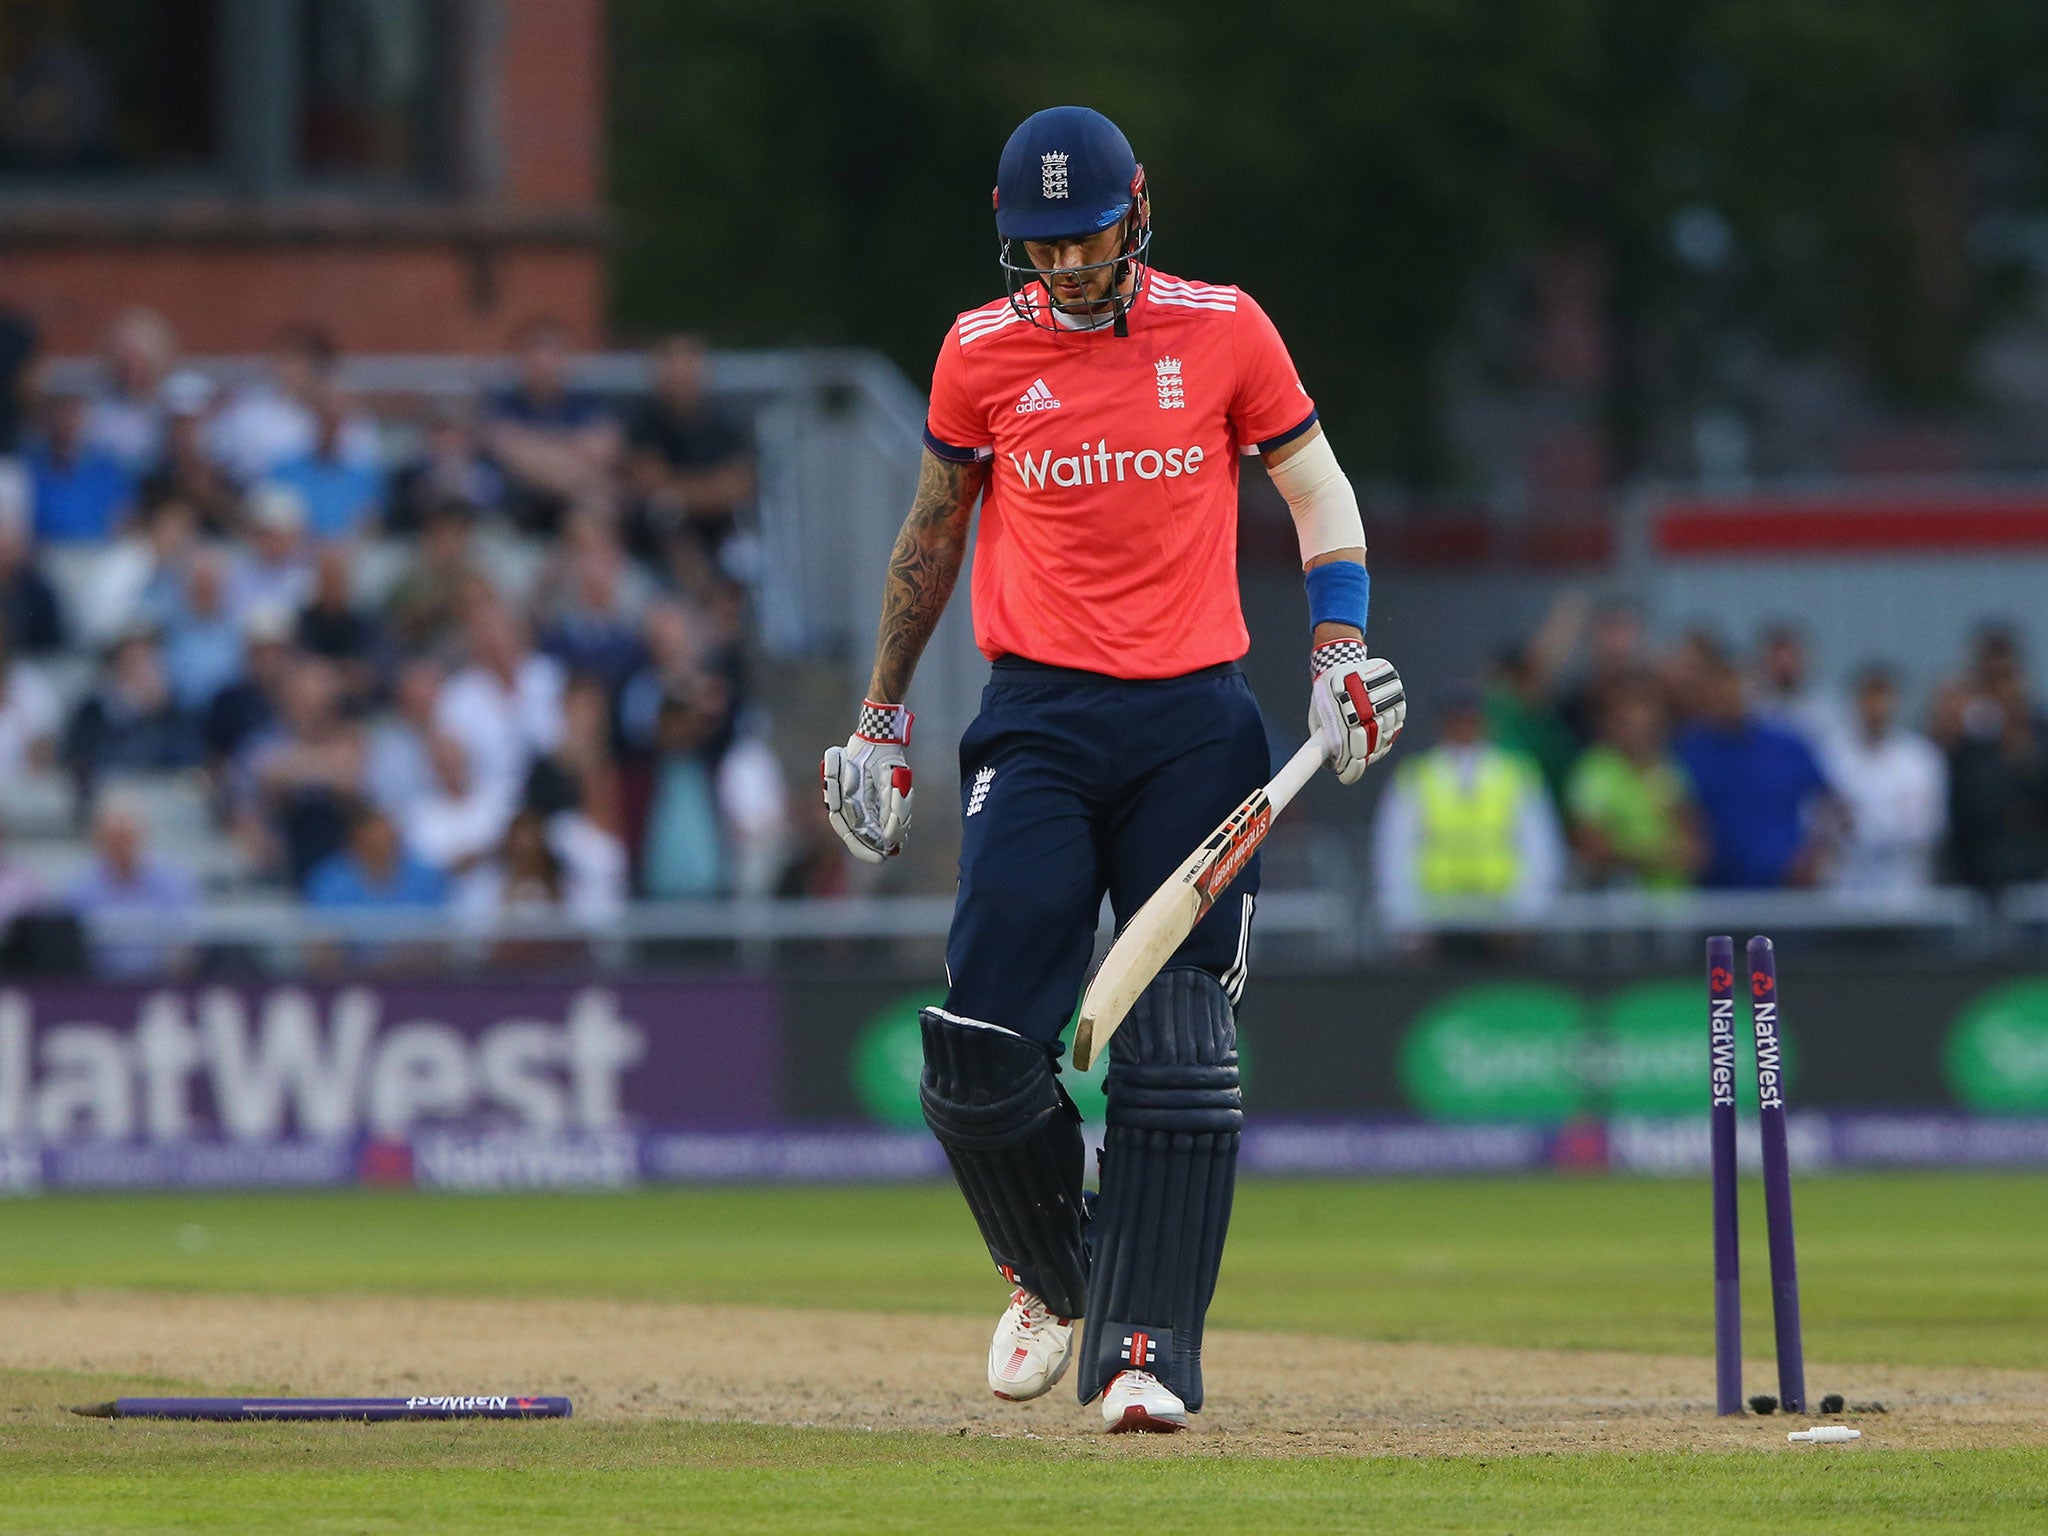 Alex Hales won't feature for England in their one-day series against West Indies next month